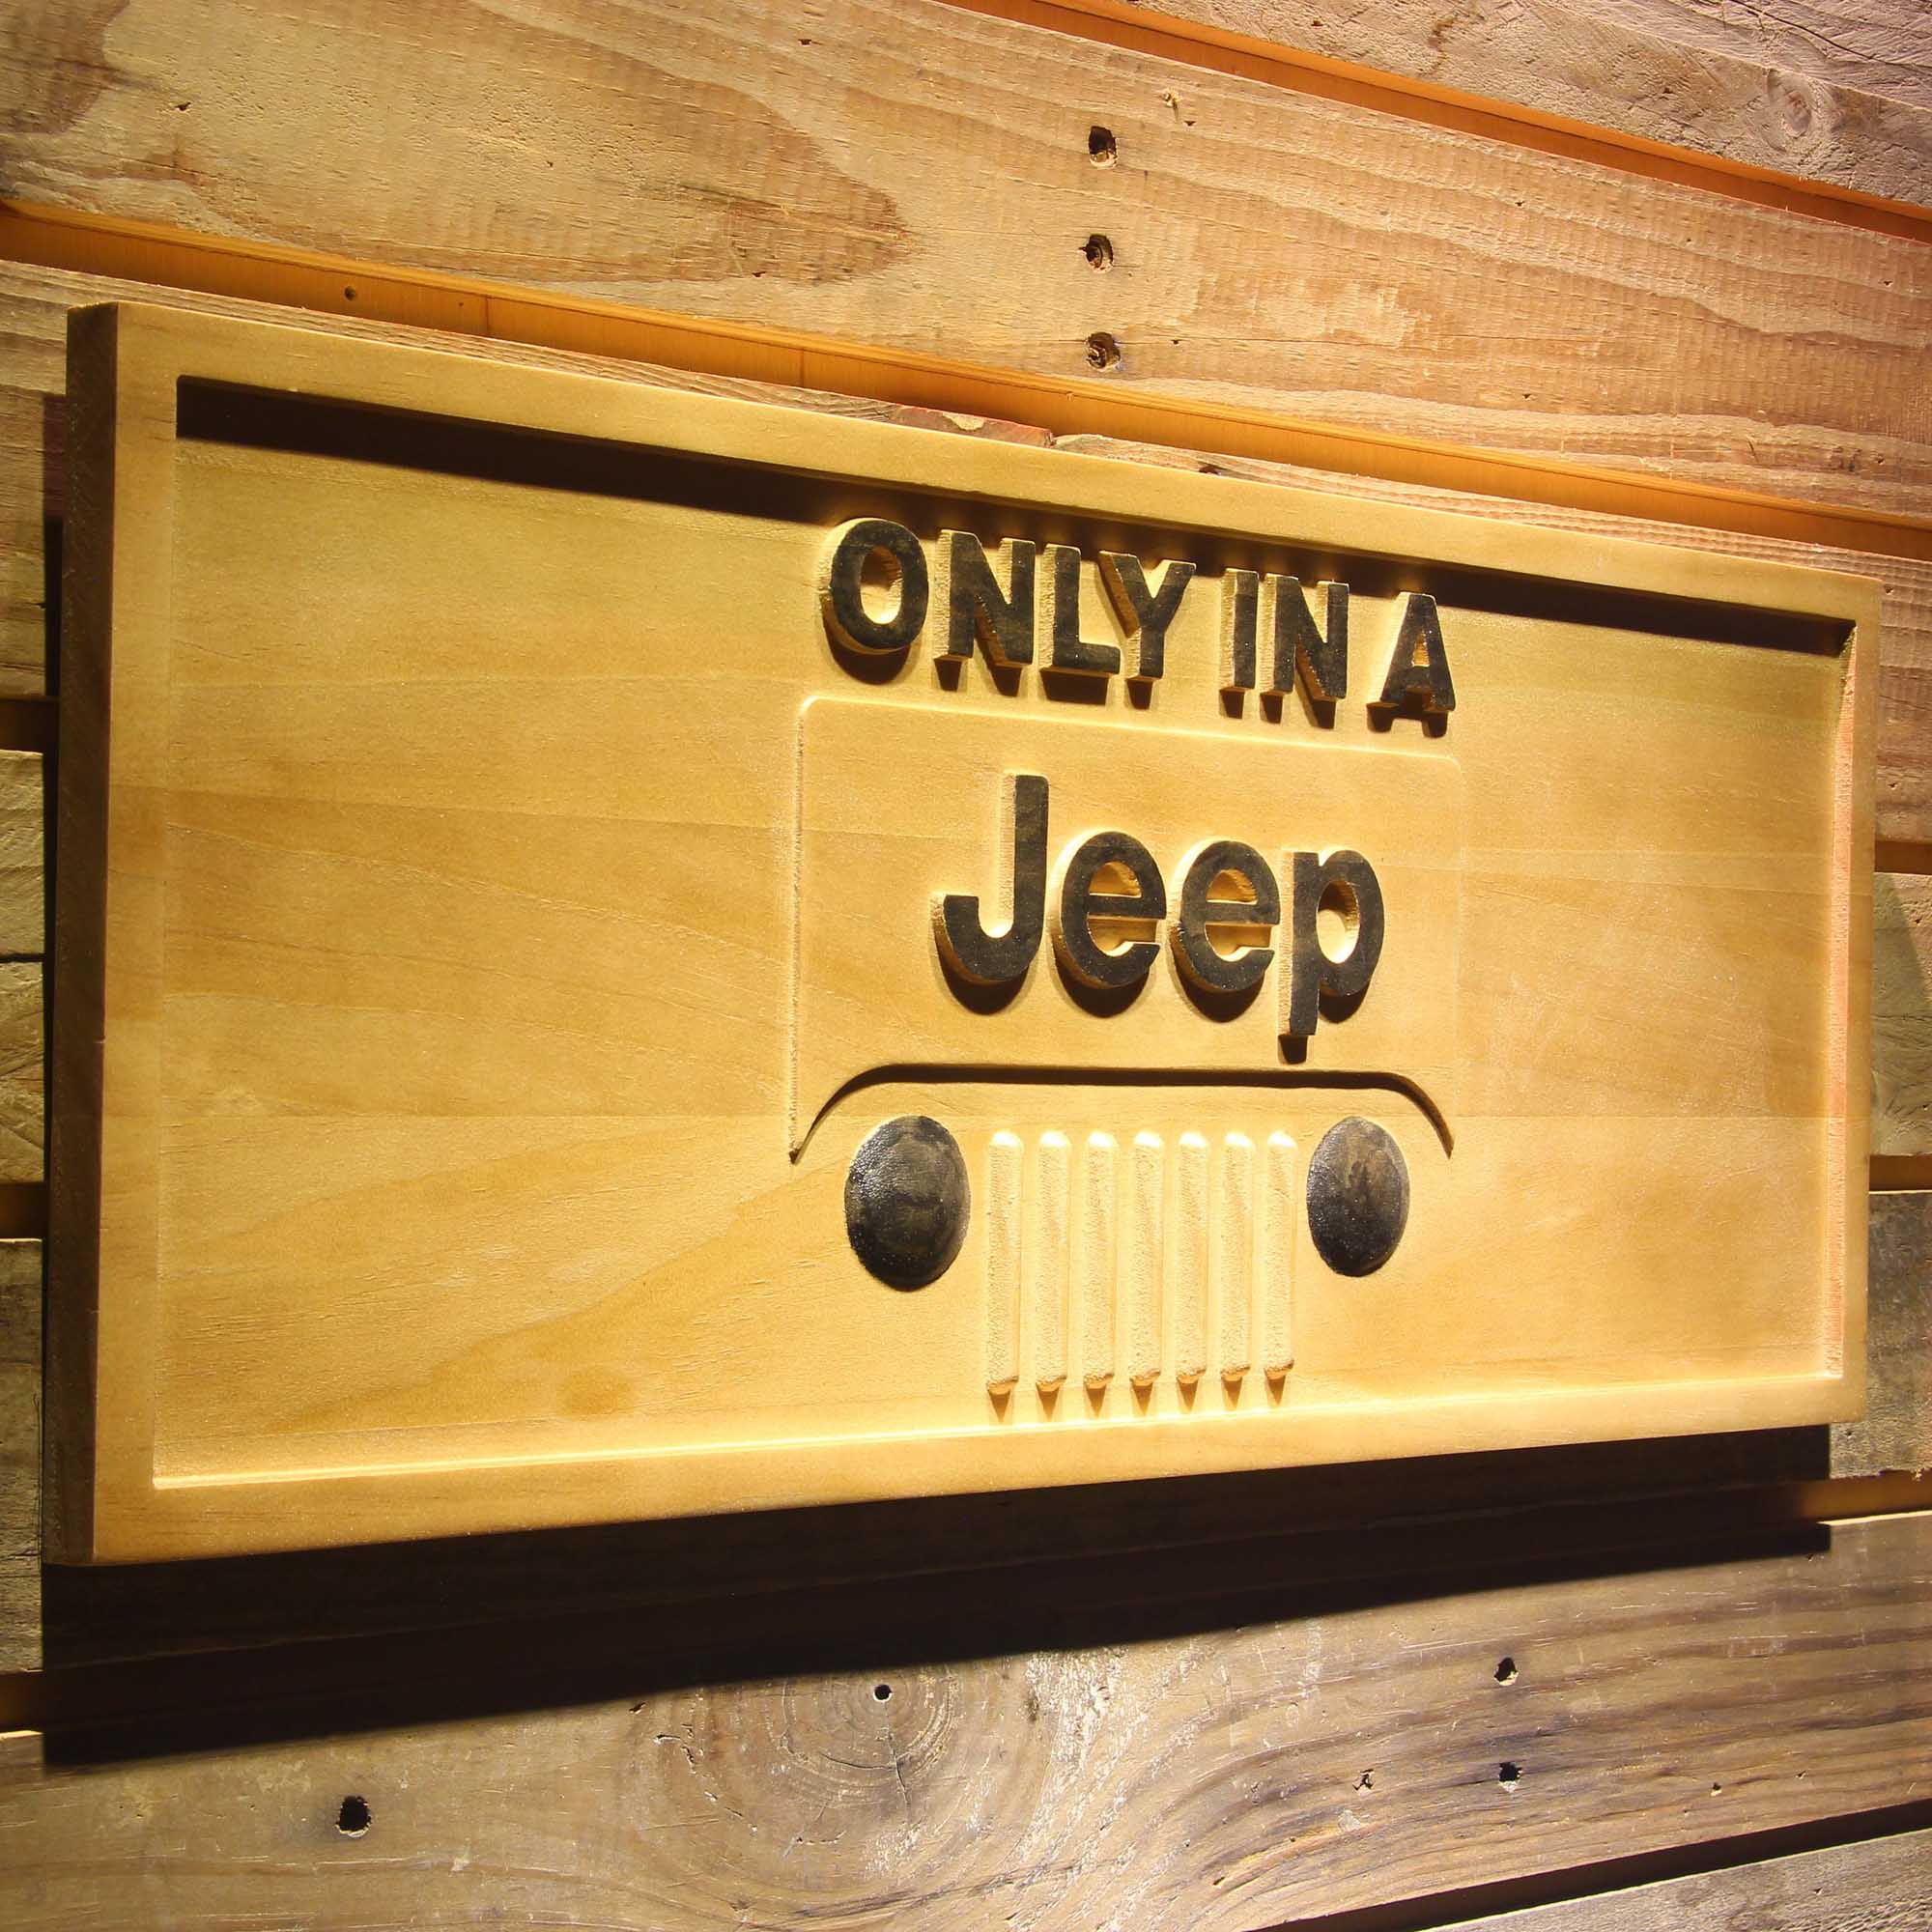 Only in a Jeep 3D Wooden Engrave Sign